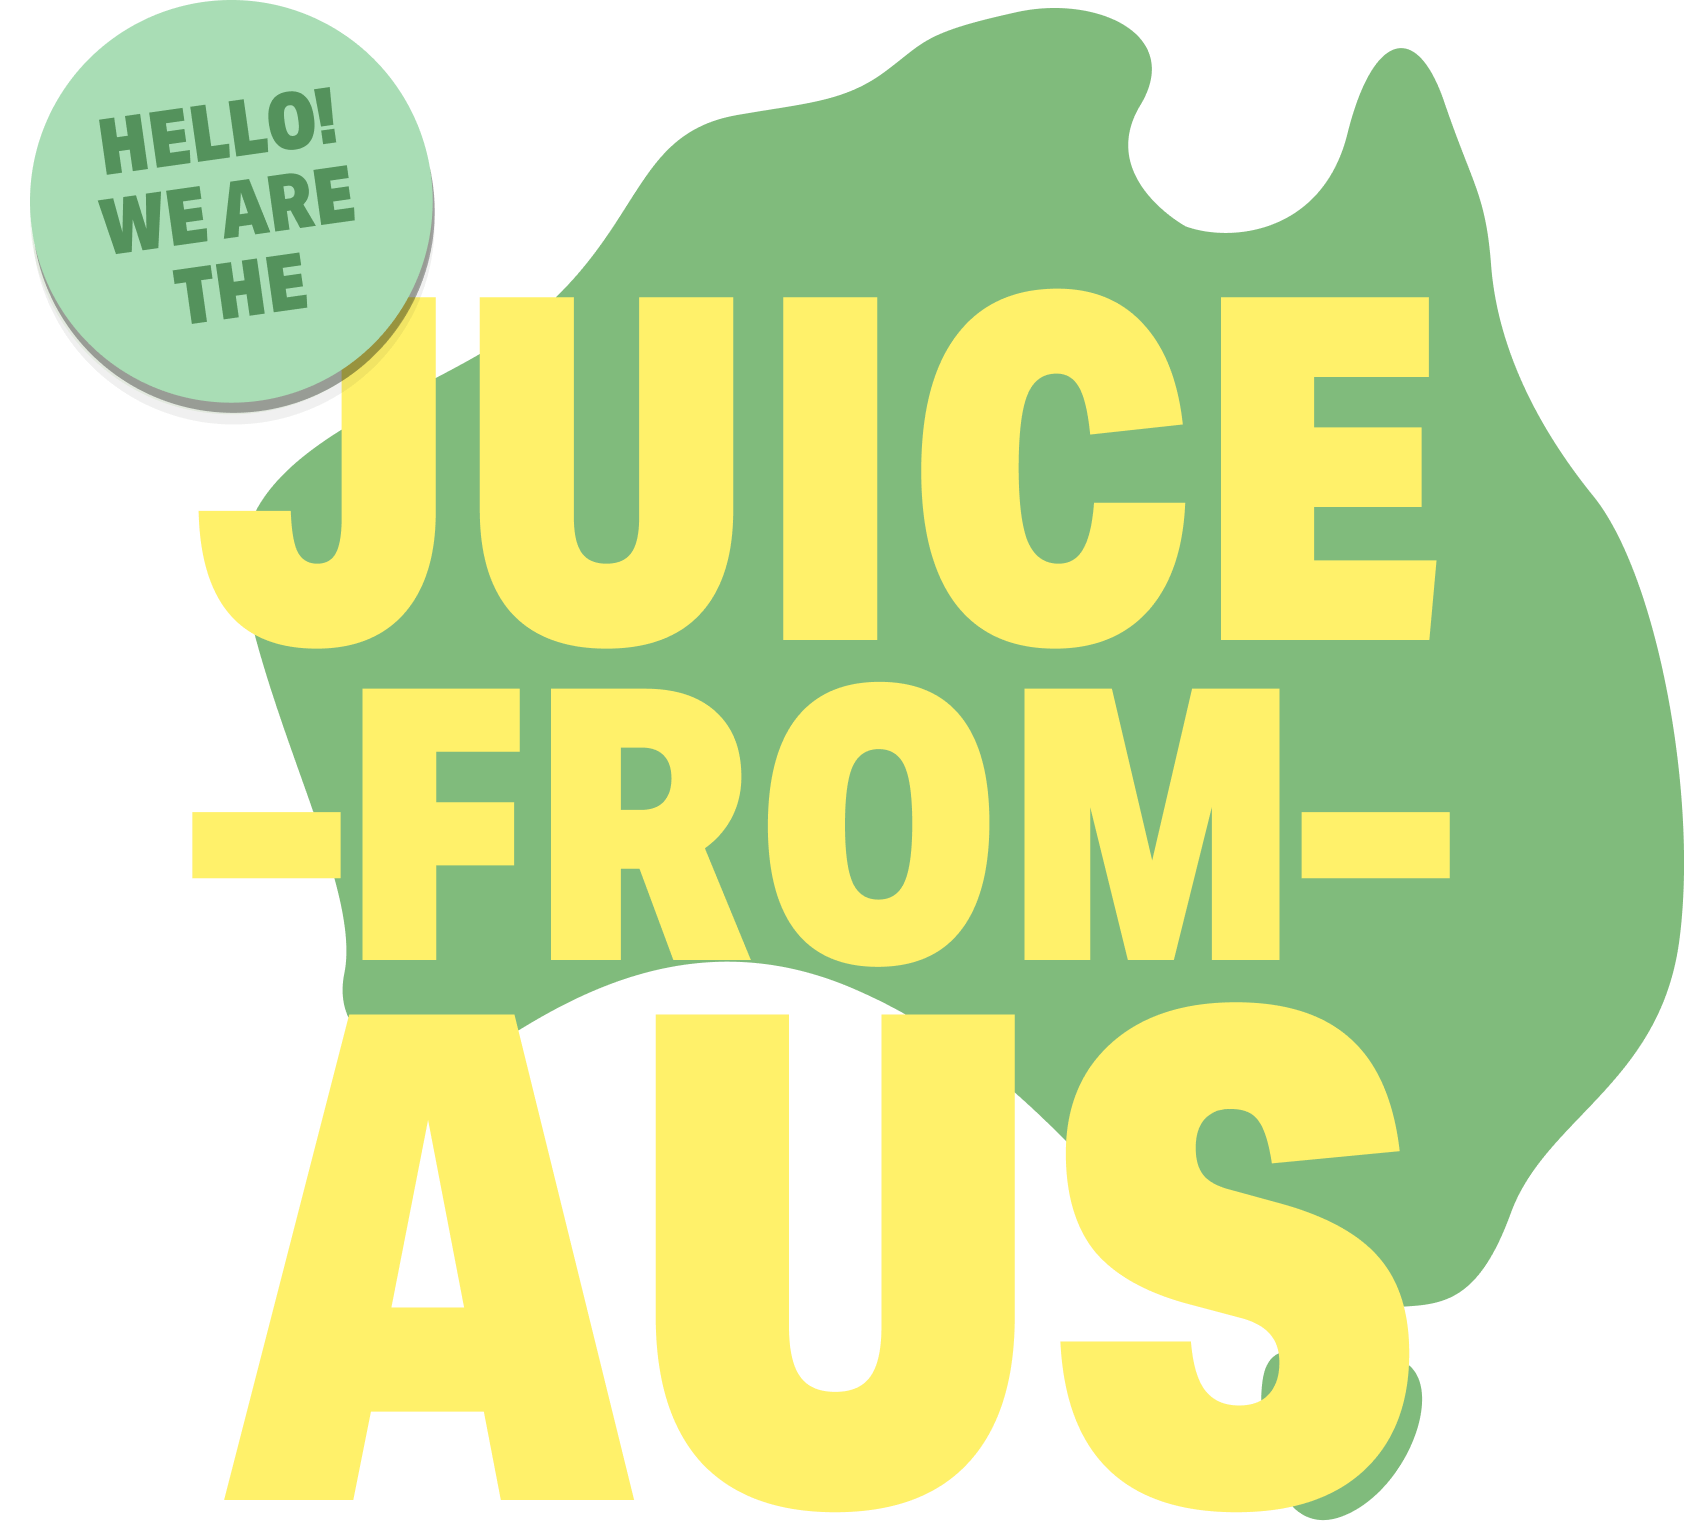 We are the juice from Aus